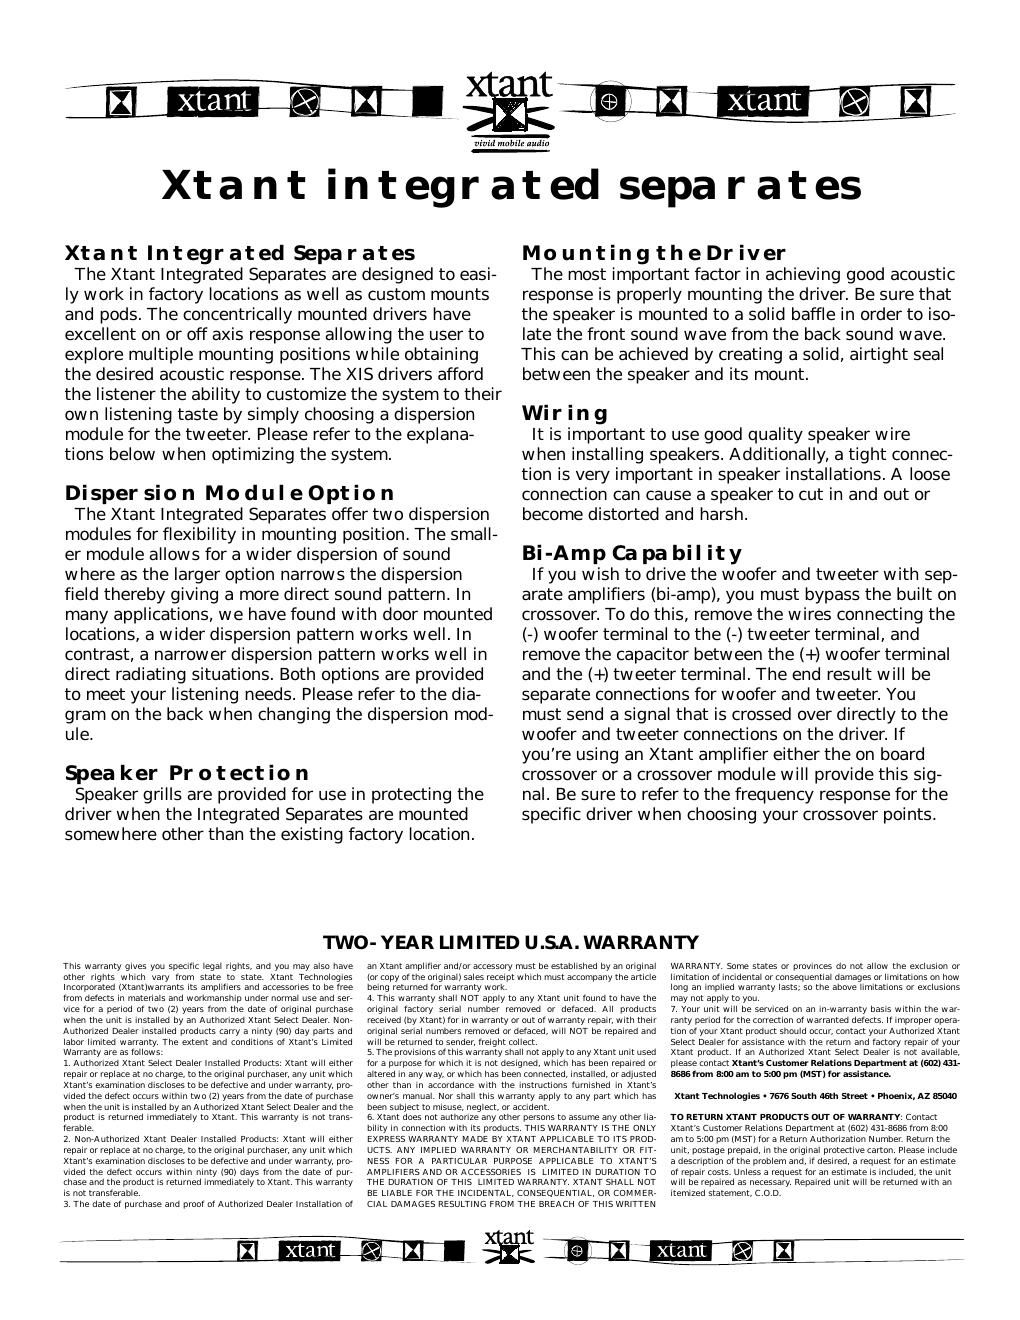 xtant xis owners manual